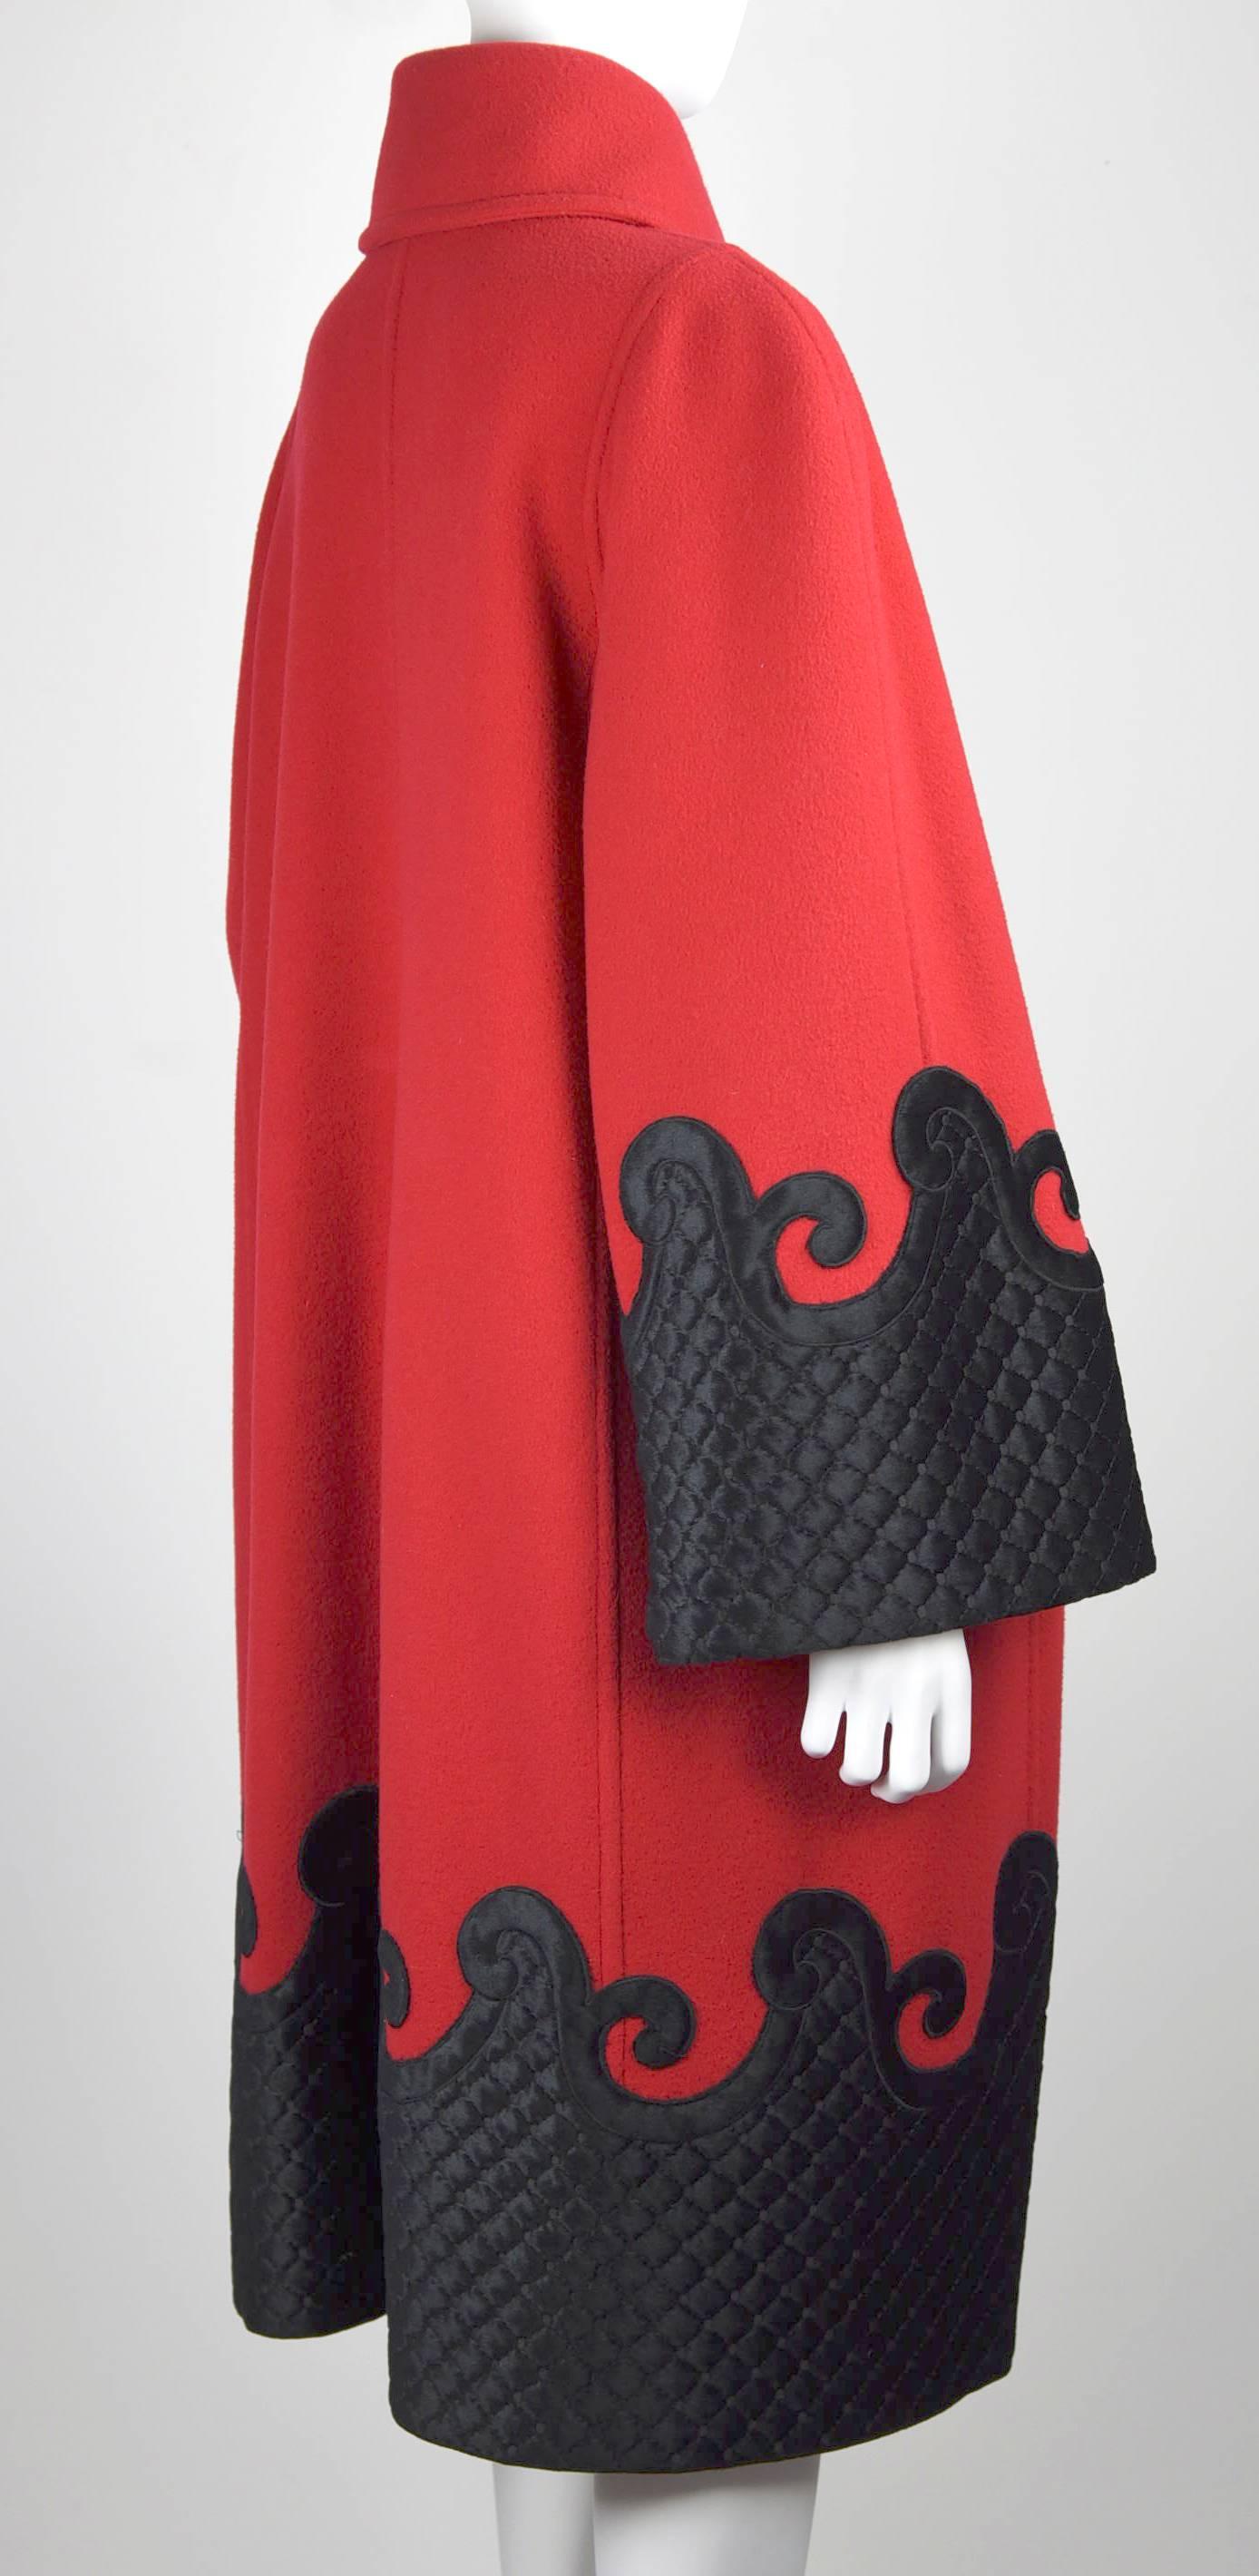 1990's Christian Lacroix Red and Black Appliqué Coat With Black Tassell In Good Condition For Sale In Portland, OR